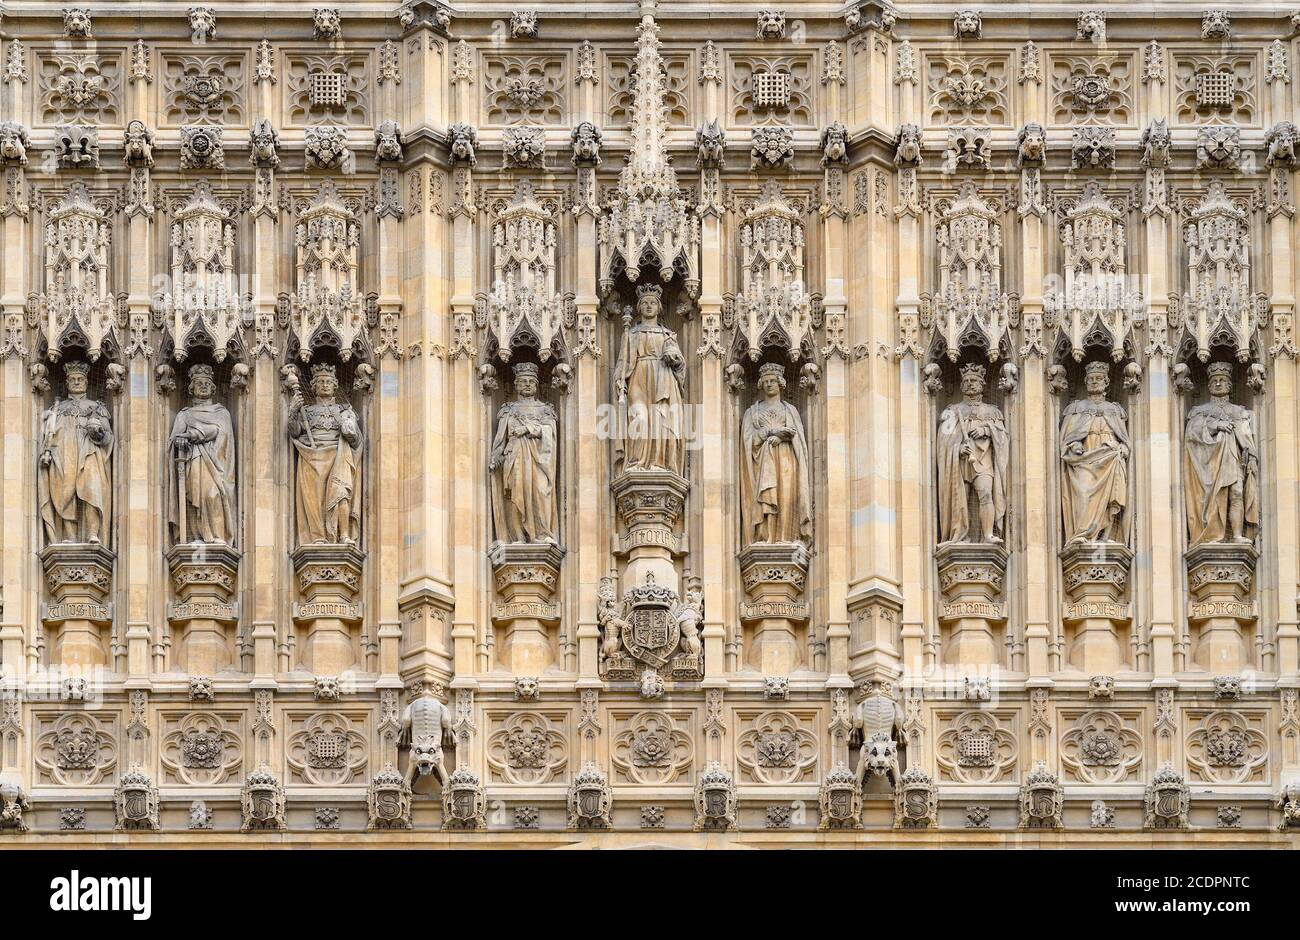 London, UK. Statues above the Sovereign's Entrance to the Houses of Parliament under the Victoria Tower. Queen Victoria in the middle, flanked by... Stock Photo